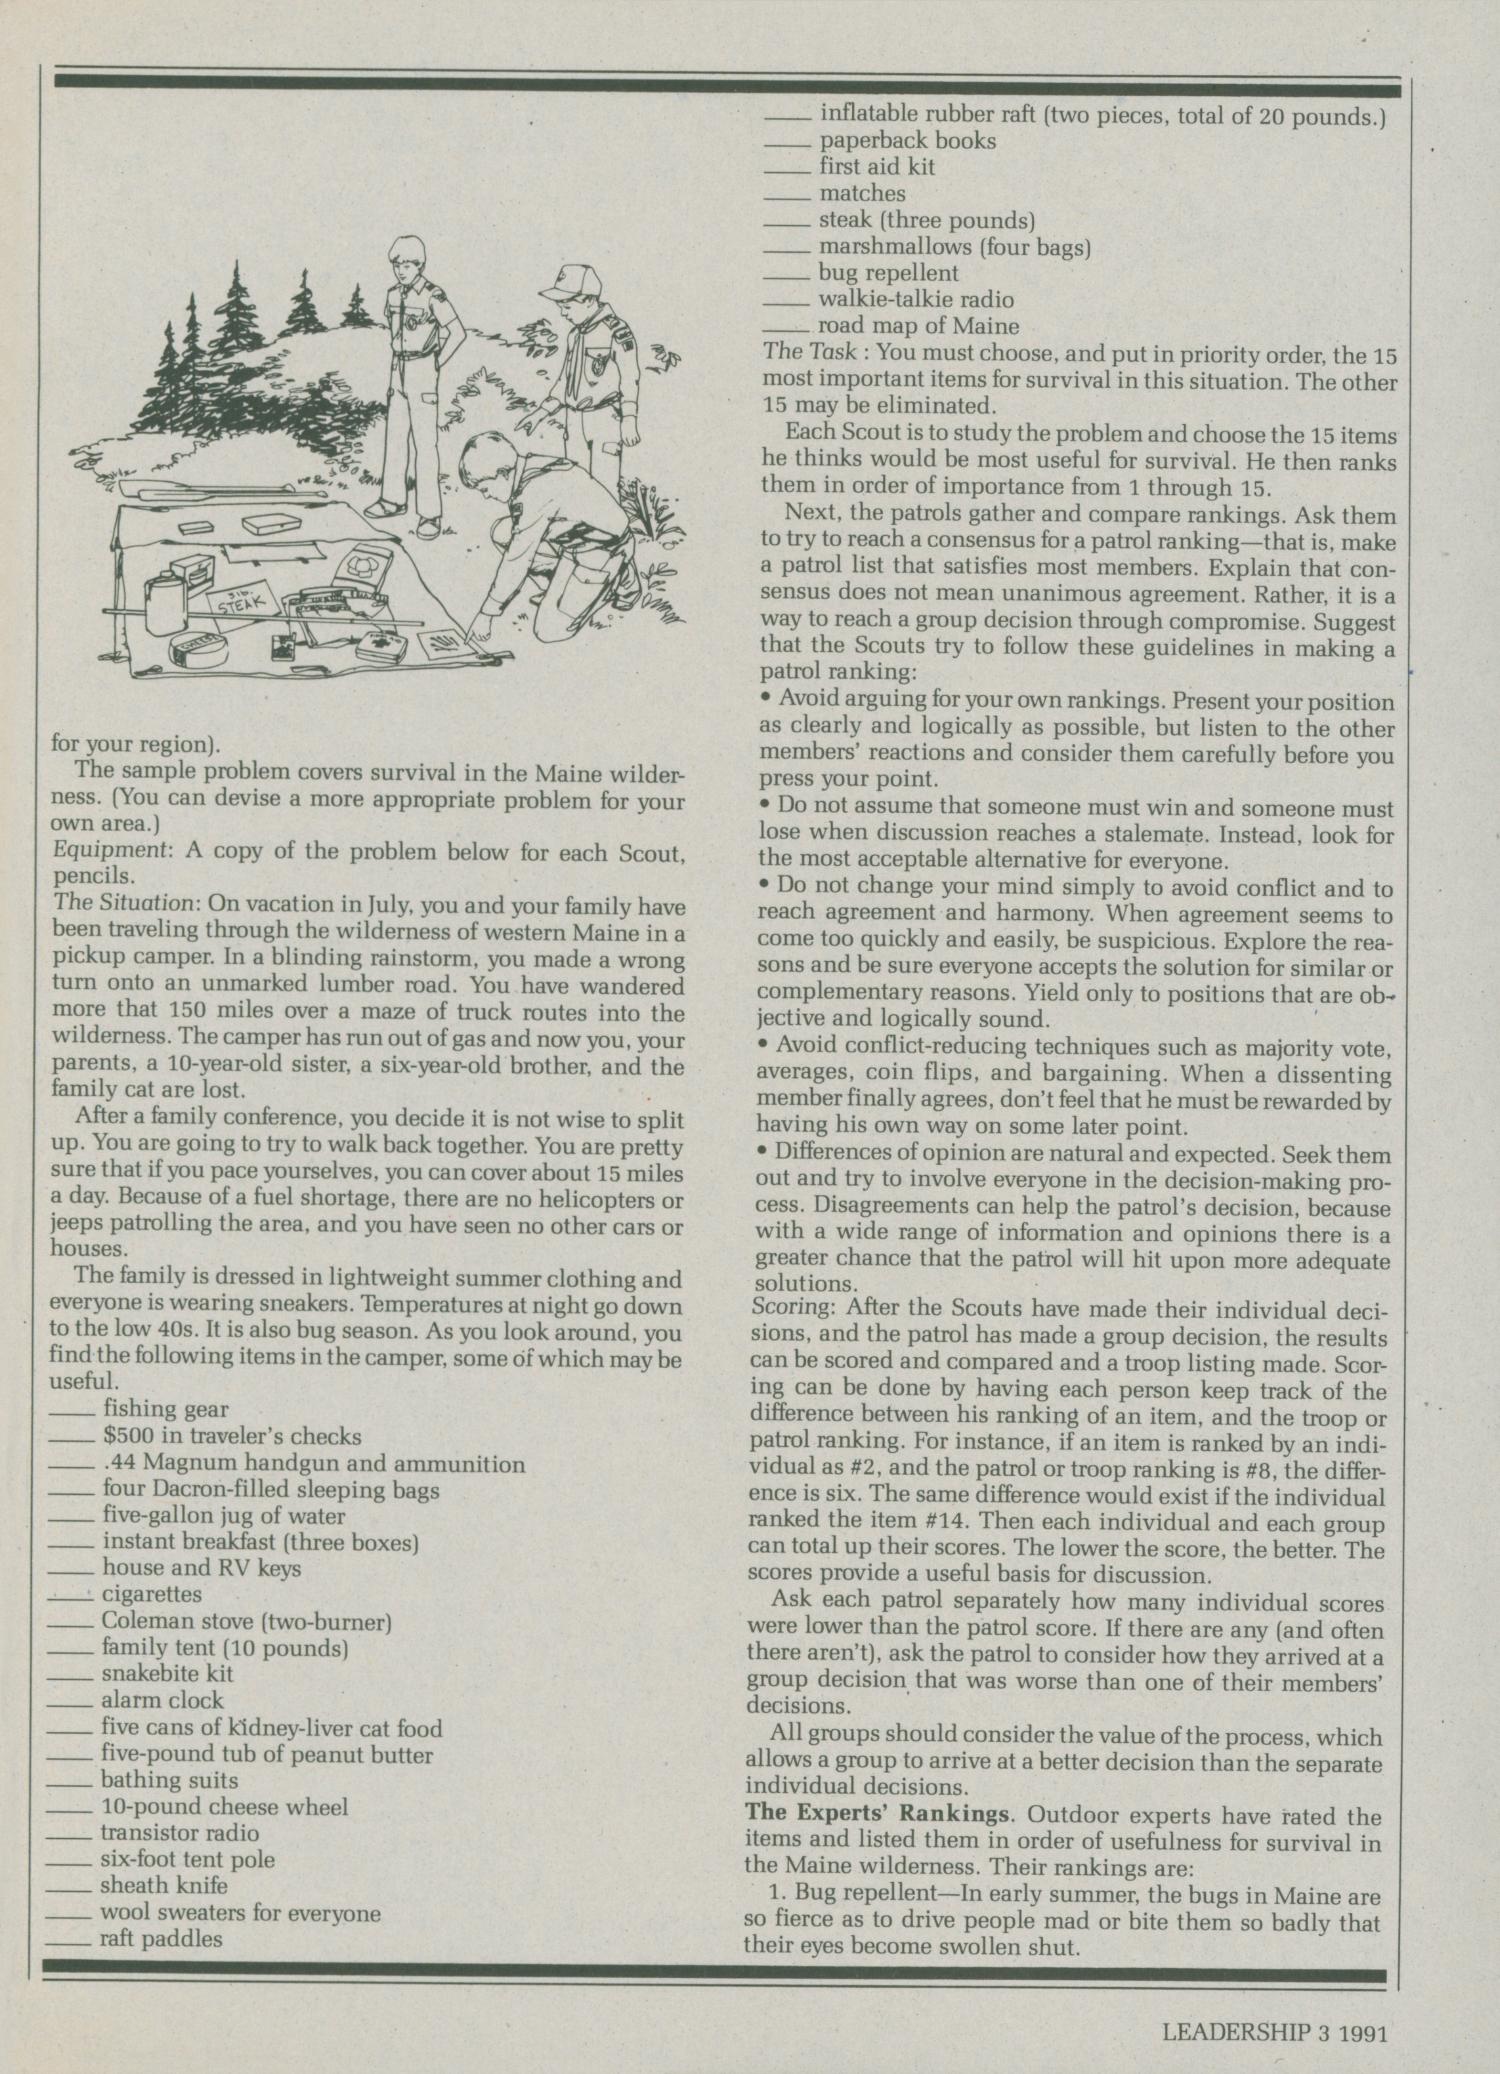 Scouting, Volume 79, Number 2, March-April 1991
                                                
                                                    3
                                                